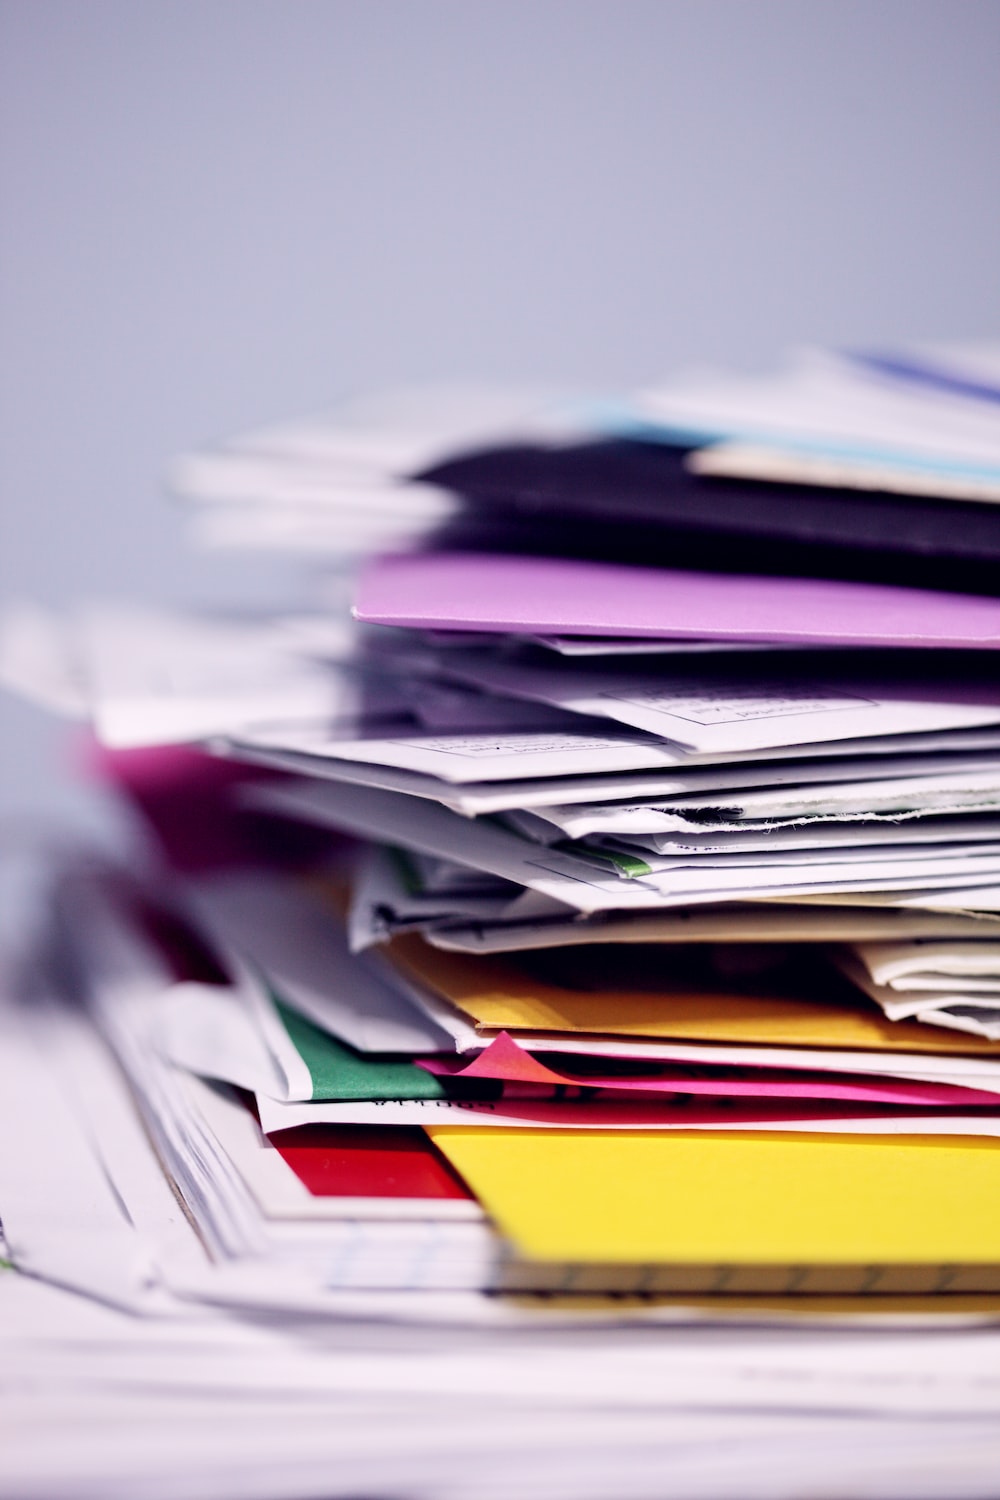 What are the four types of filing systems?